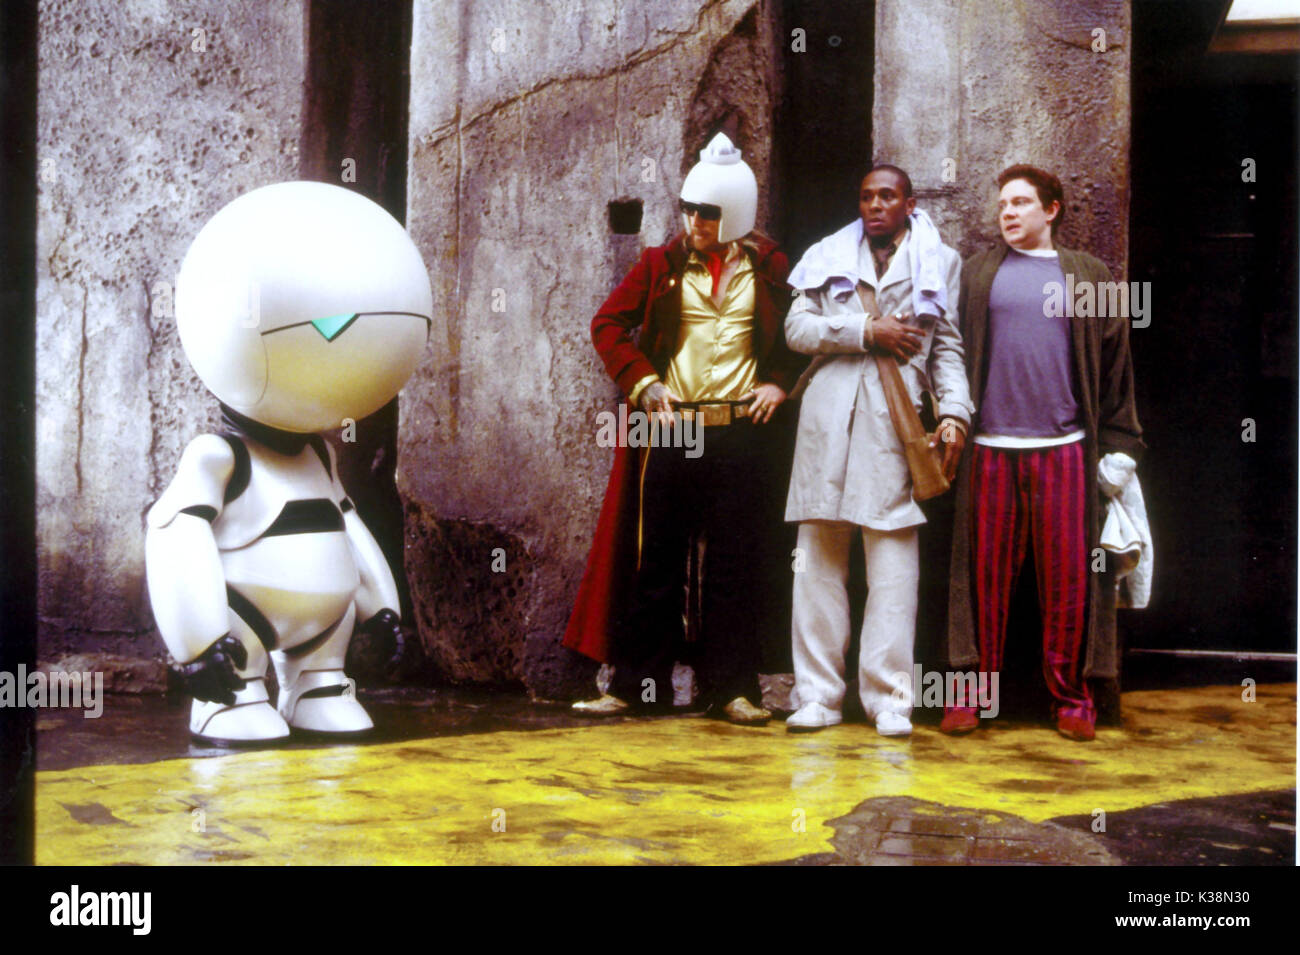 THE HITCHHIKER'S GUIDE TO THE GALAXY [ US / BR / 2005 ]   [robot] Marvin, as voiced by ALAN RICKMAN  SAM ROCKWELL, as Zaphod Beeblebrox,  MOS DEF, as Ford Prefect,  MARTIN FREEMAN, as Arthur Dent Stock Photo